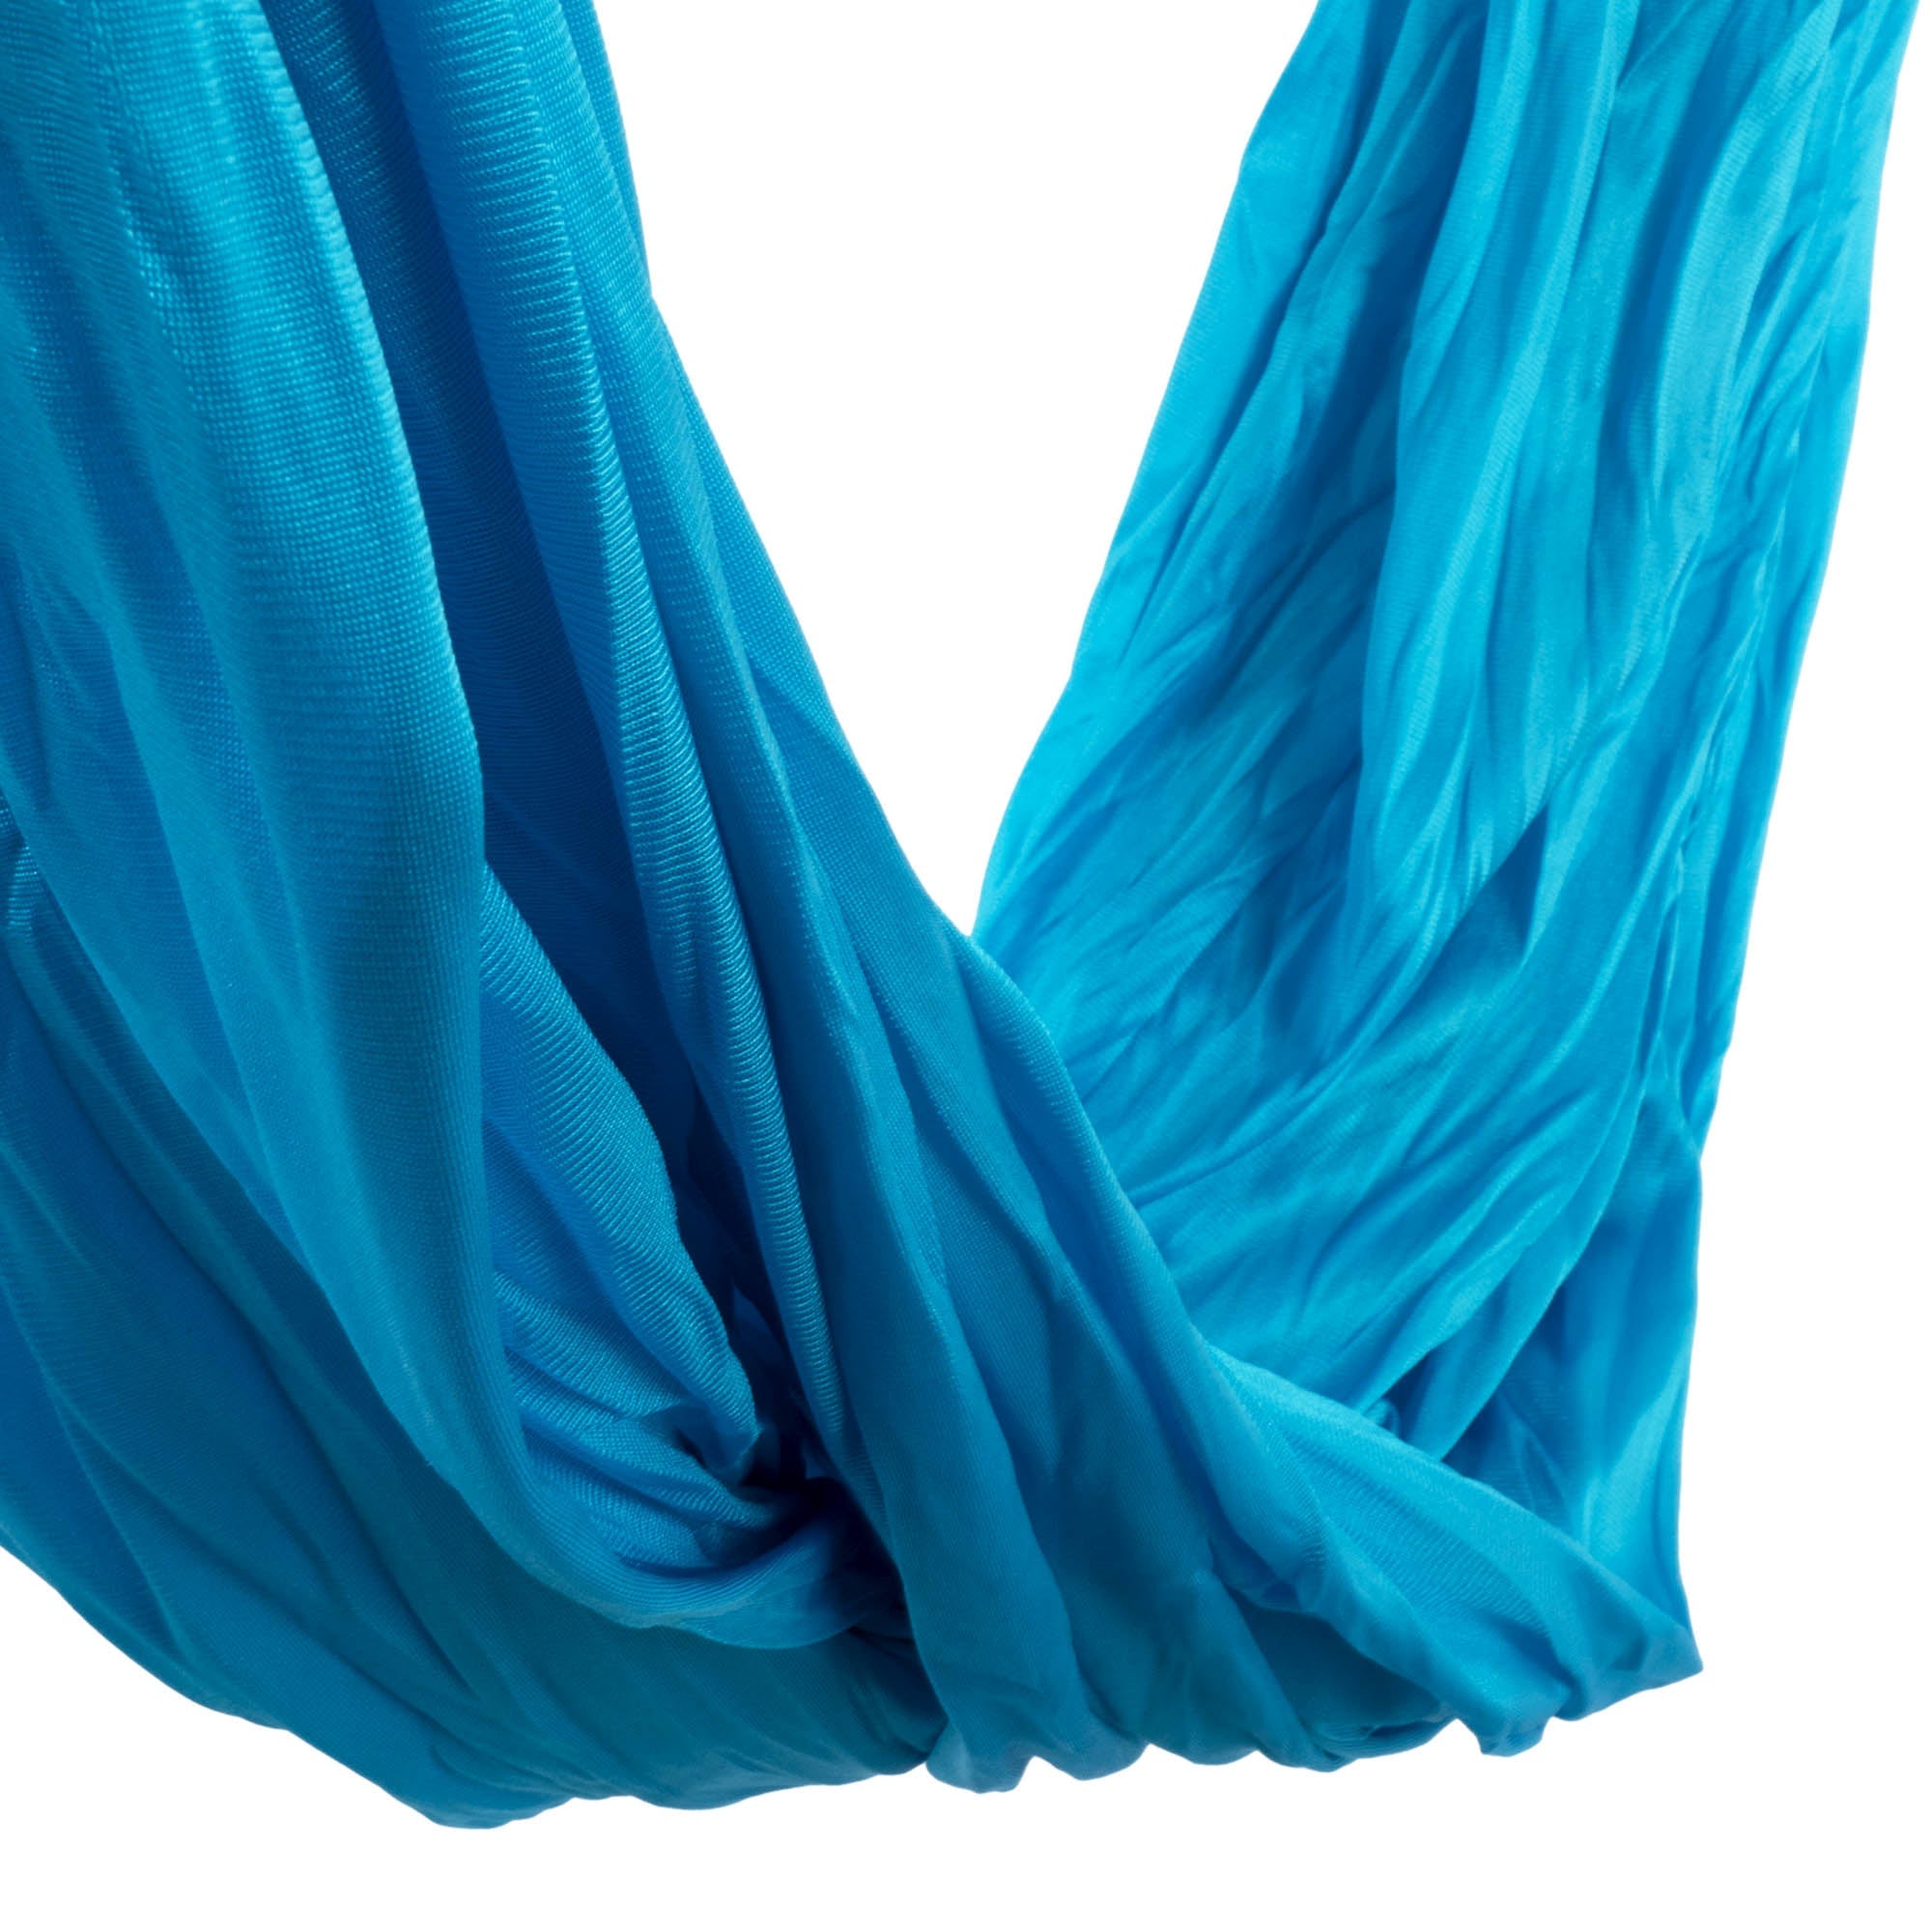 Prodigy 6m aerial yoga hammock in turquoise close up 